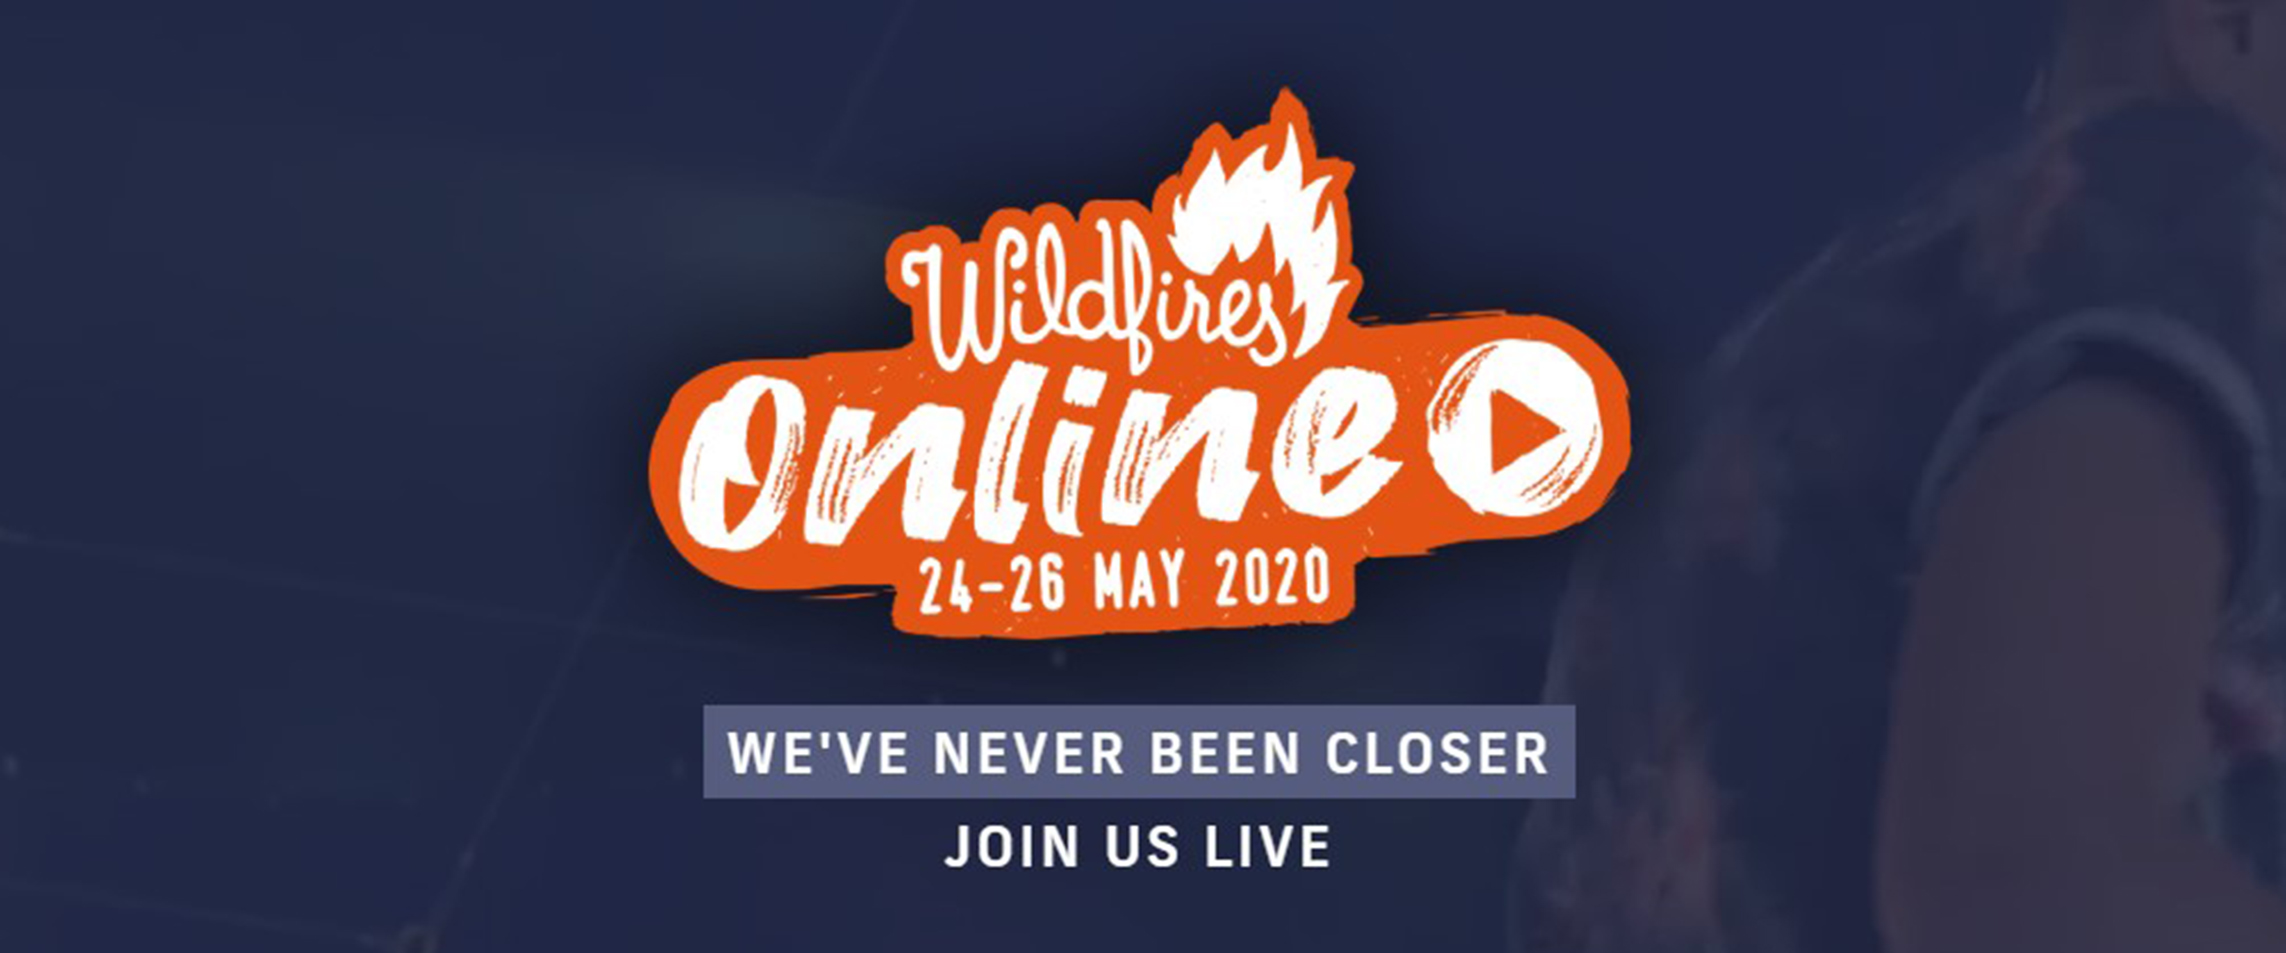 Wildfires Festival Online Sunday 24th Tuesday 26th May St Paul with